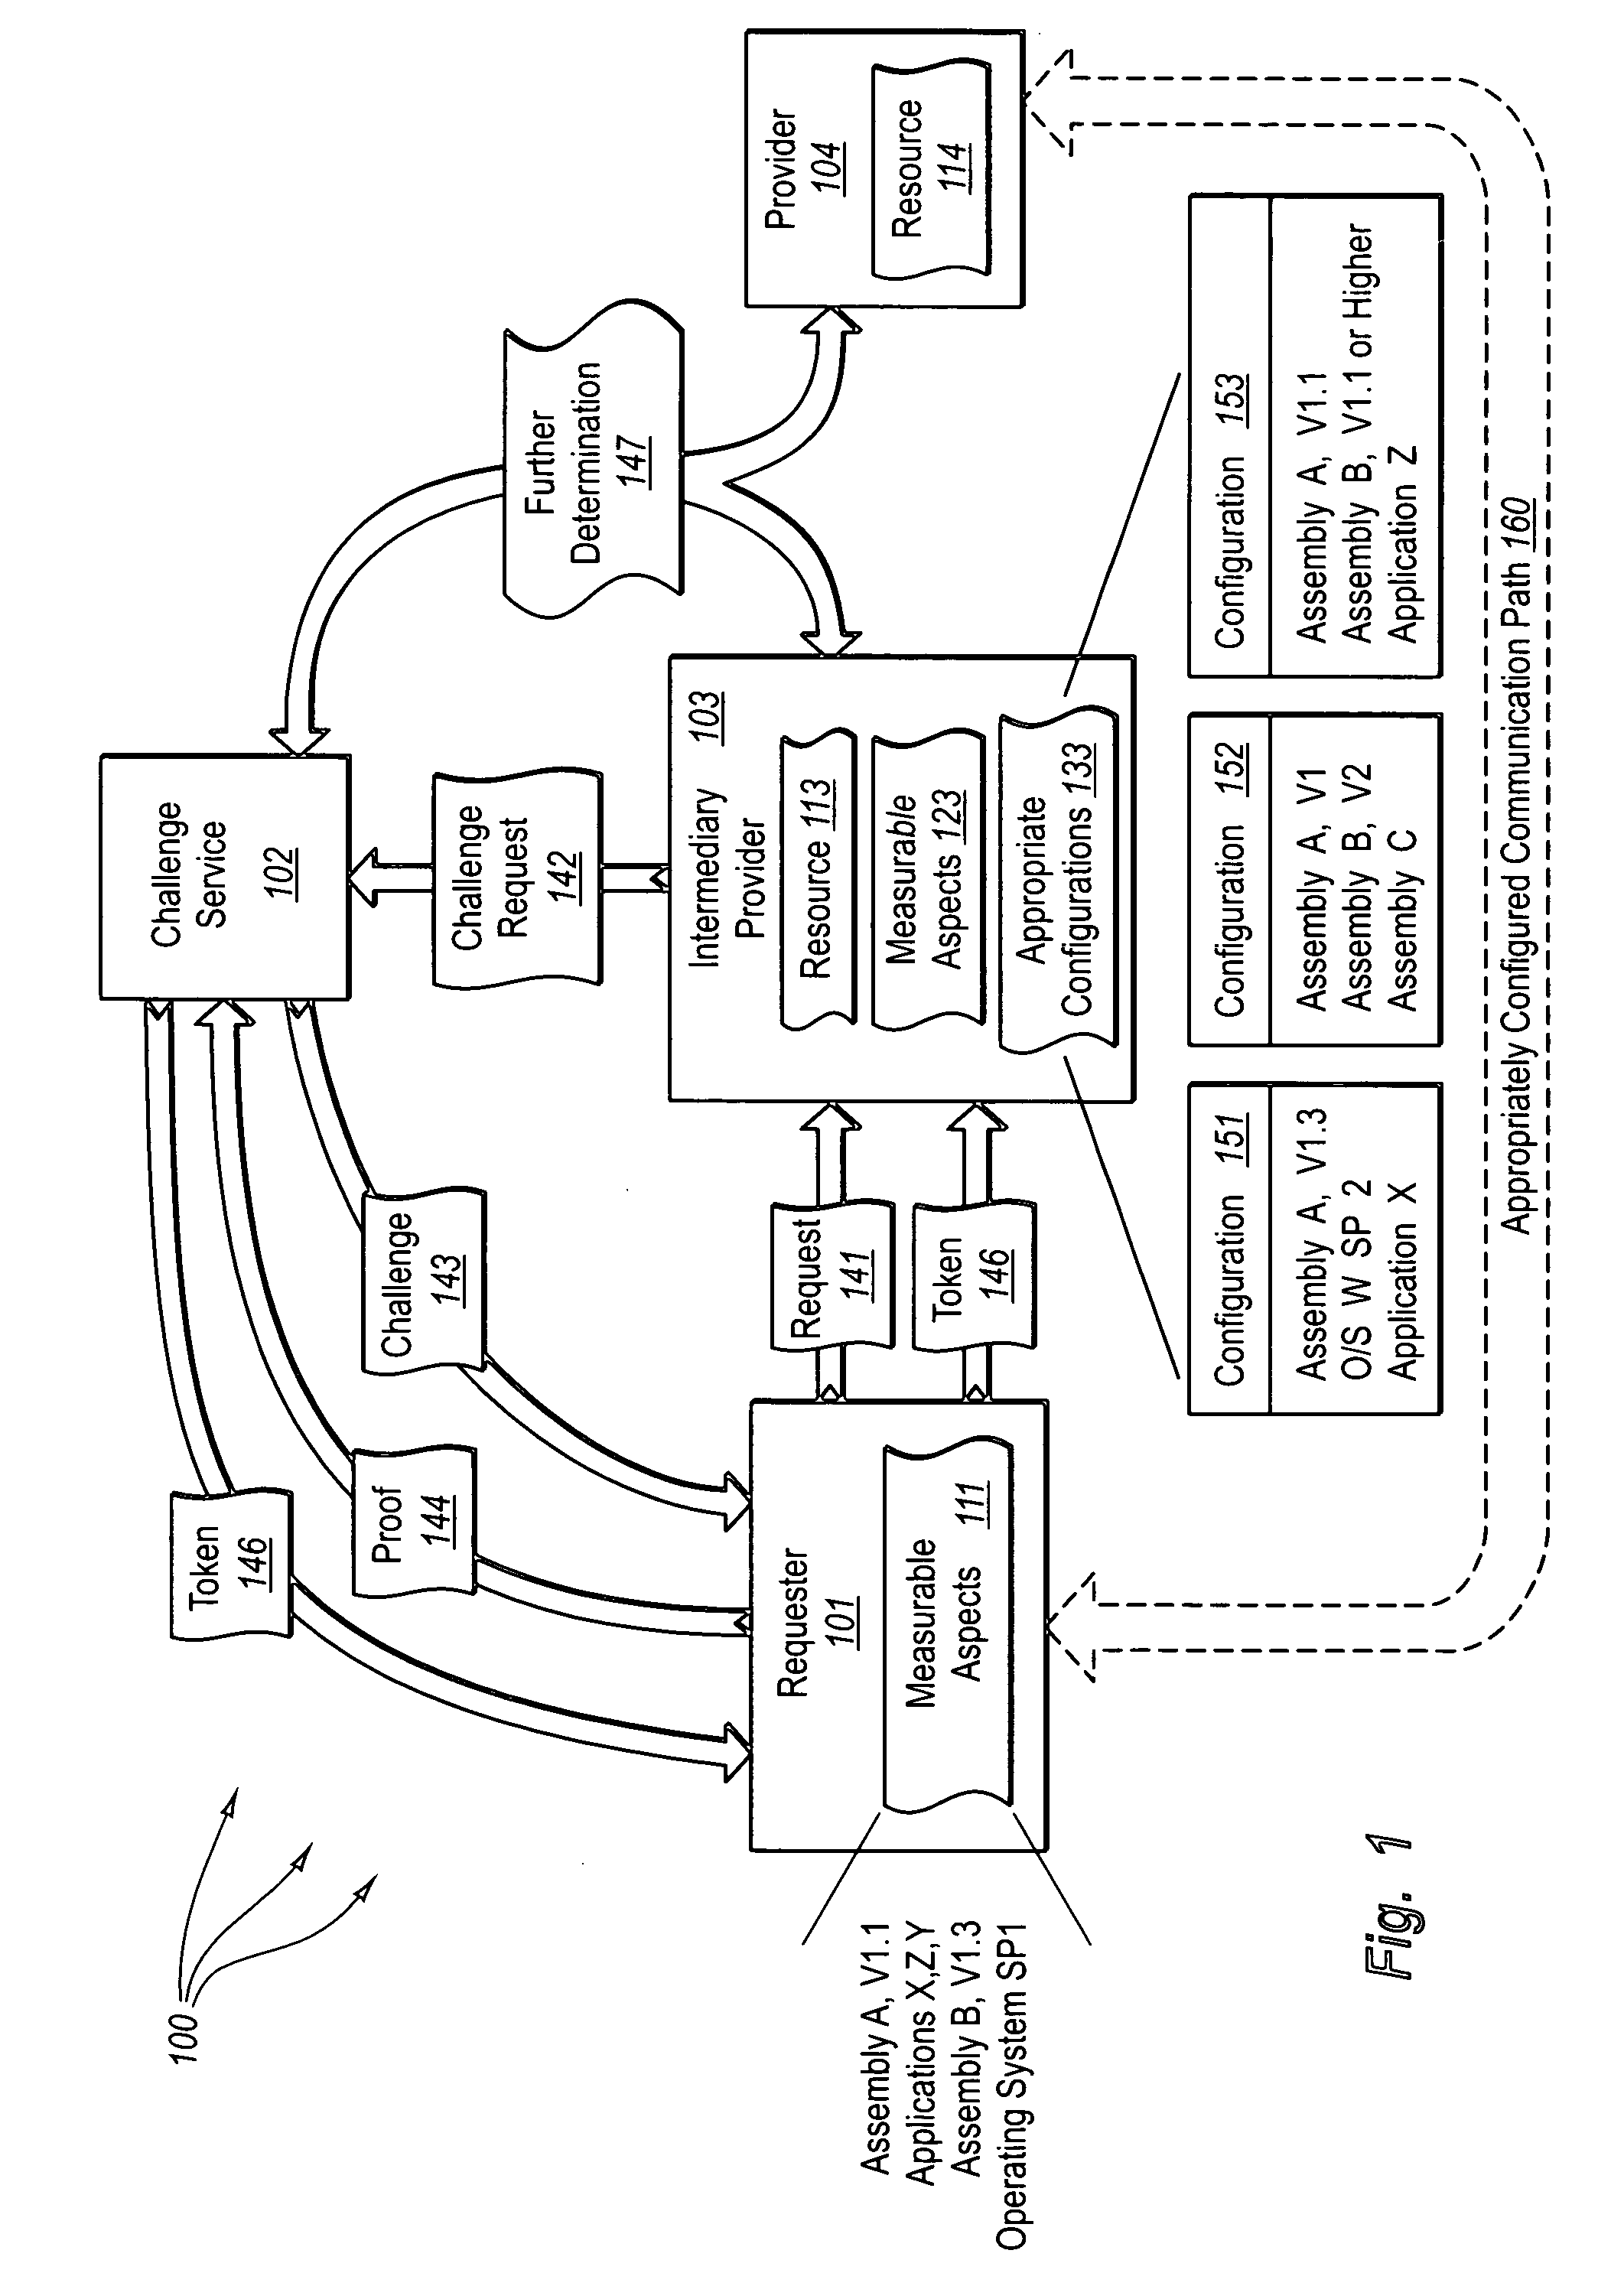 Bi-directionally verifying measurable aspects associated with modules, pre-computing solutions to configuration challenges, and using configuration challenges along with other authentication mechanisms